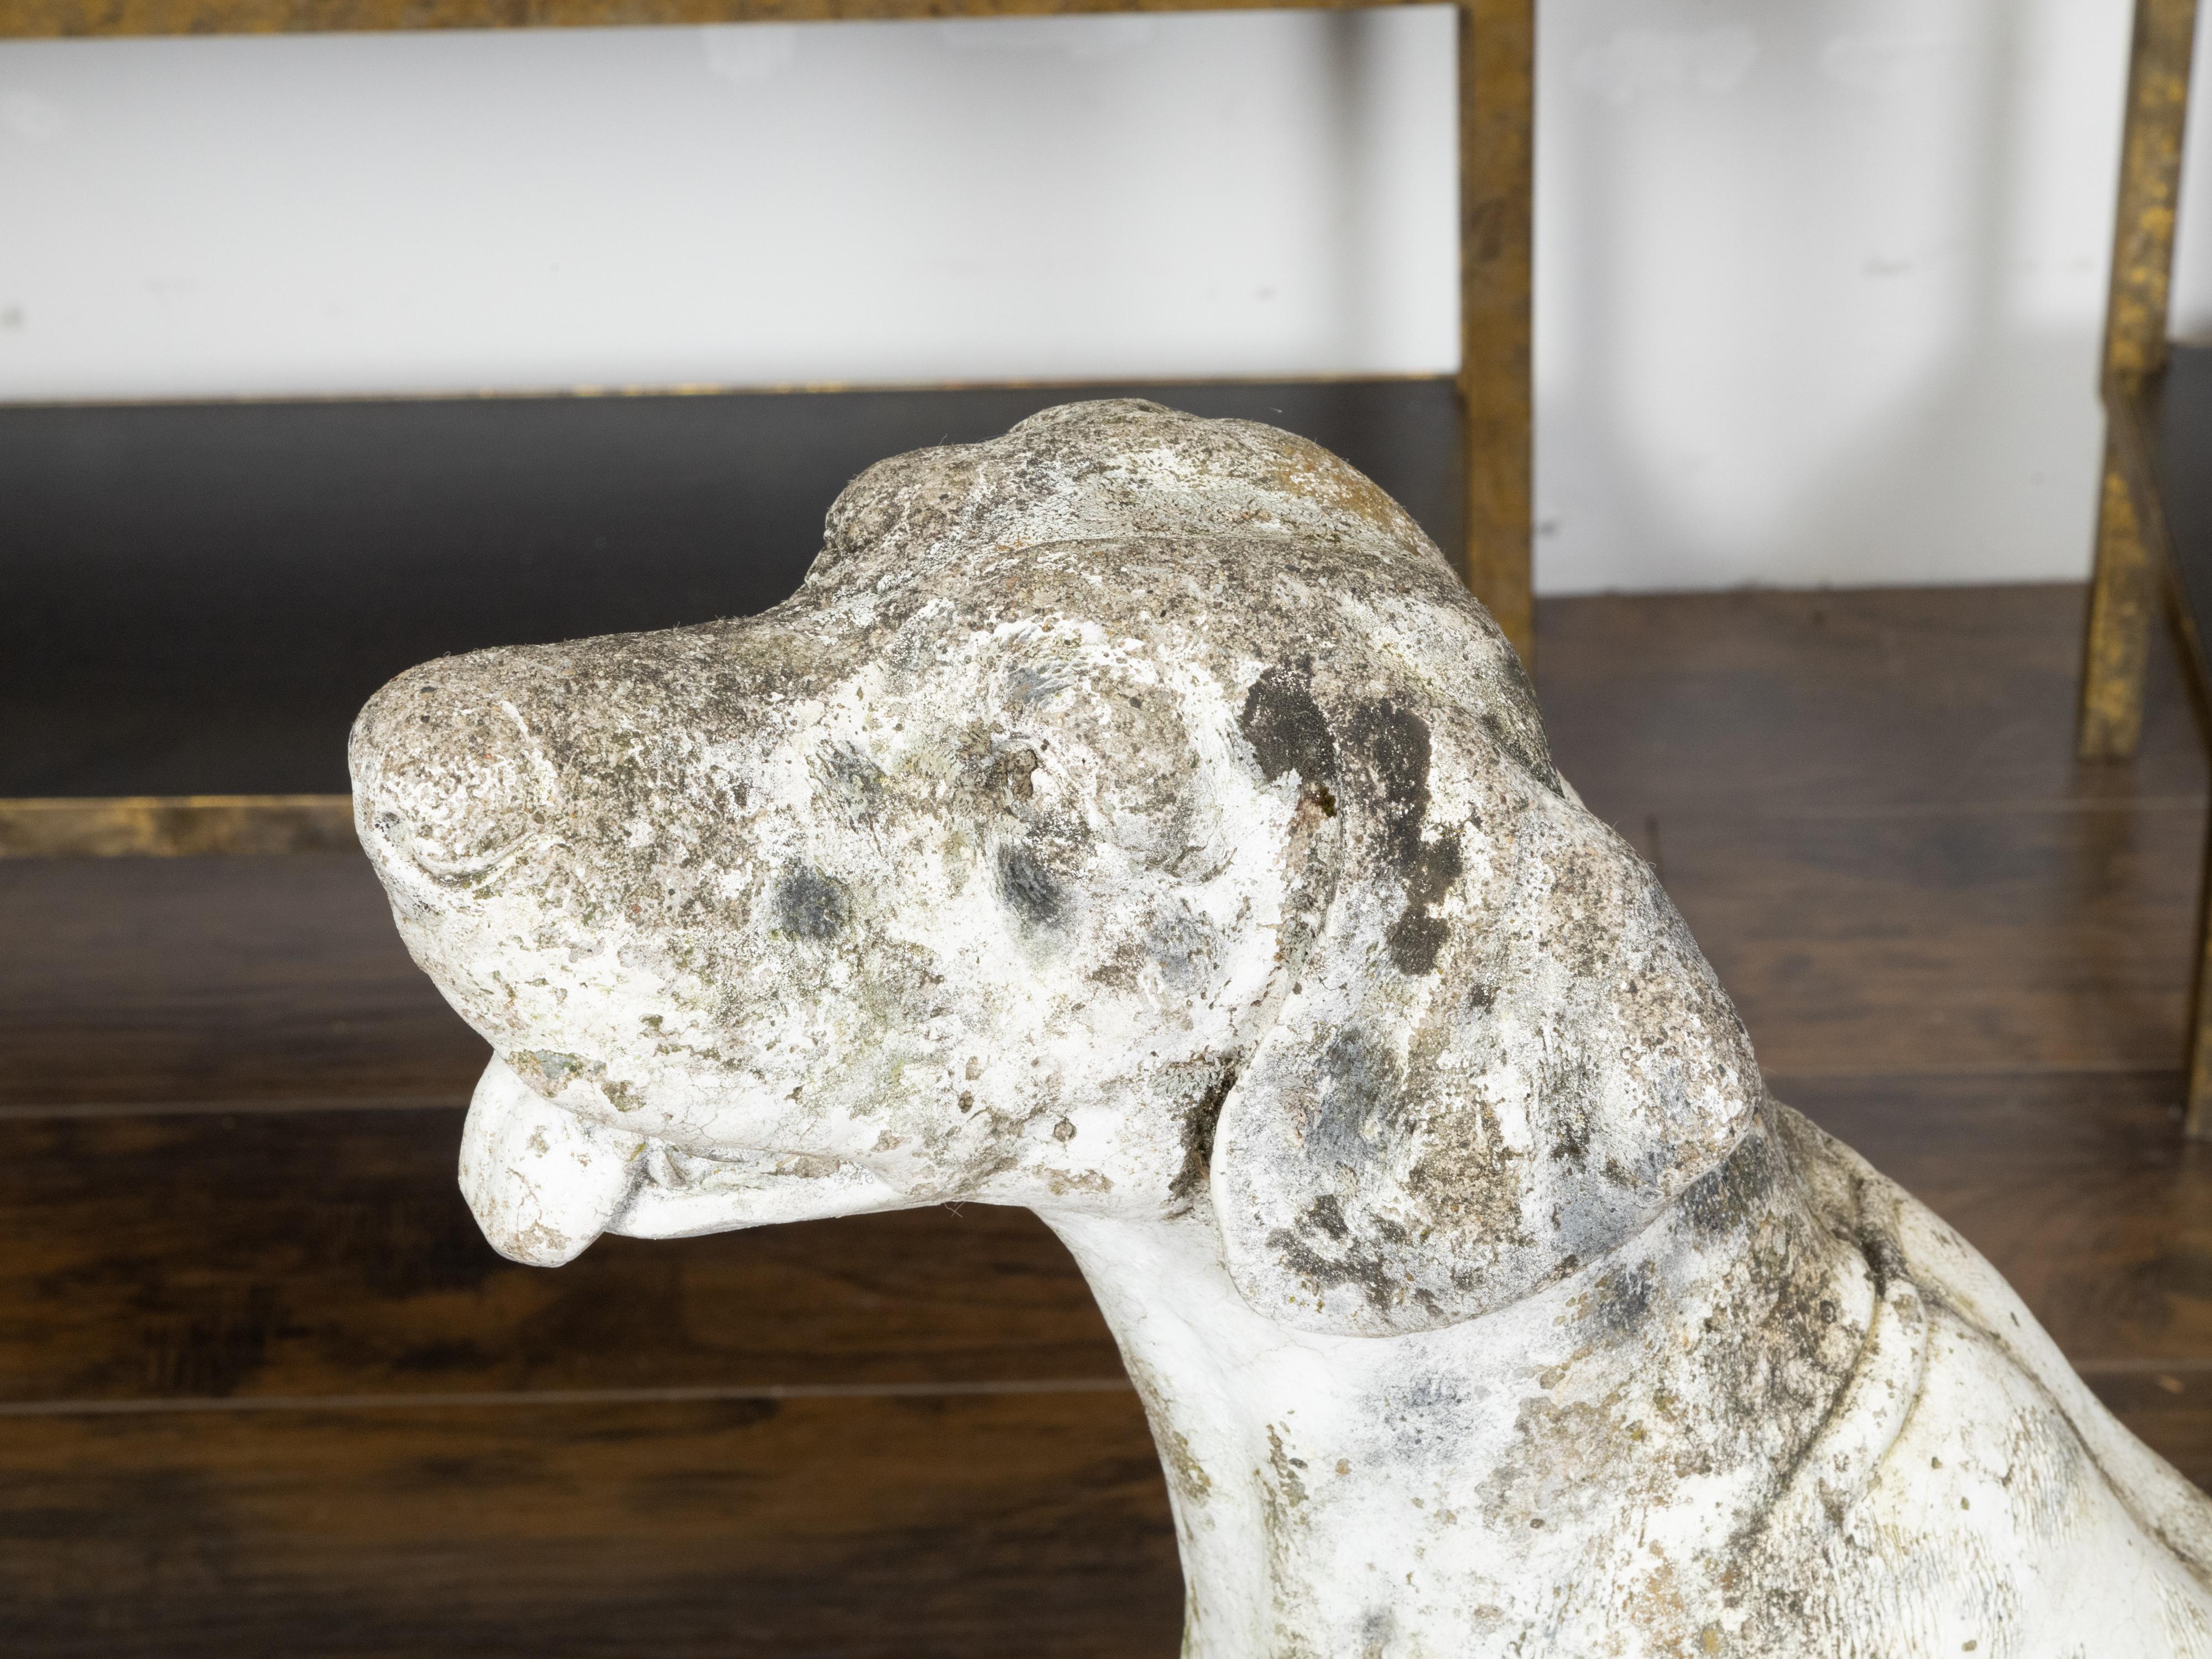 English 1920s Carved Stone Sculpture of a Dog Obediently Sitting on a Base 6